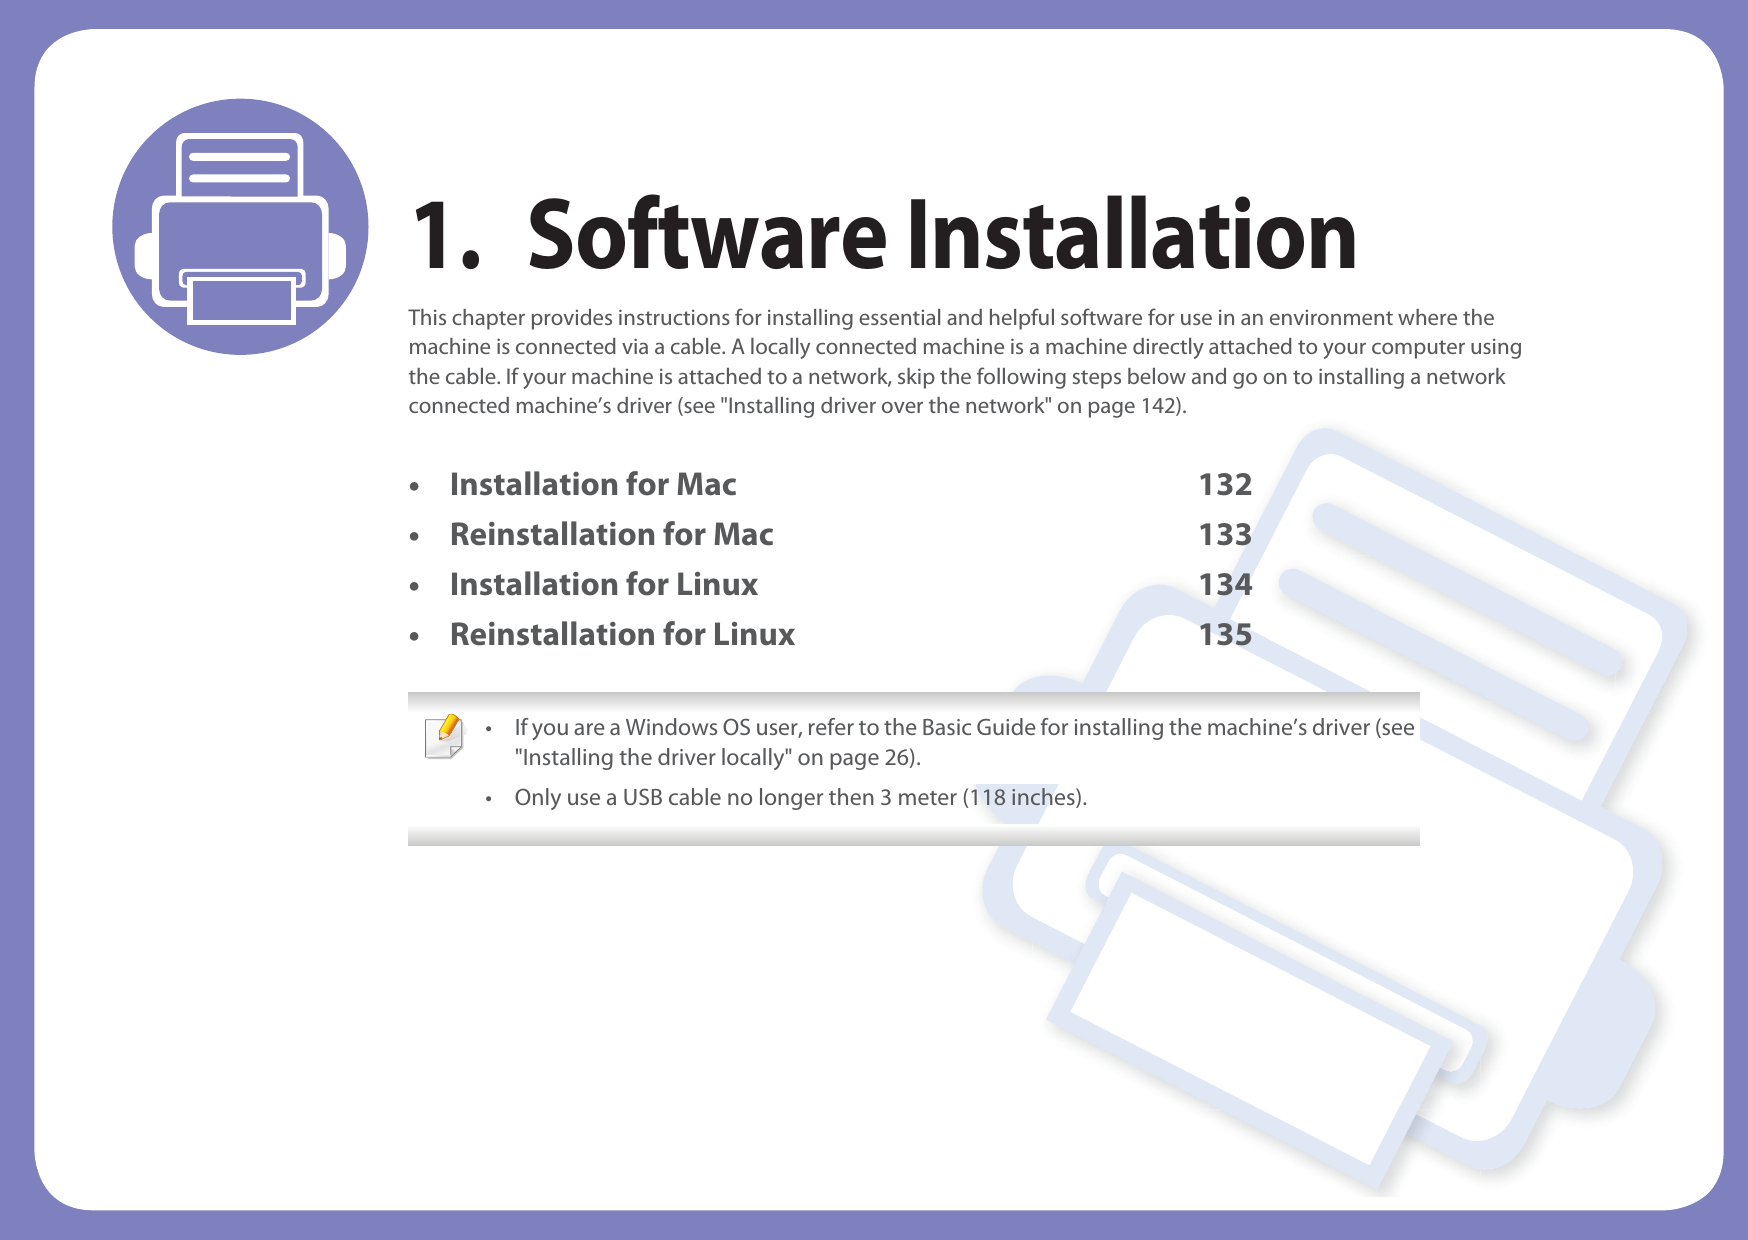 1. Software InstallationThis chapter provides instructions for installing essential and helpful software for use in an environment where the machine is connected via a cable. A locally connected machine is a machine directly attached to your computer using the cable. If your machine is attached to a network, skip the following steps below and go on to installing a network connected machine’s driver (see &quot;Installing driver over the network&quot; on page 142).• Installation for Mac 132• Reinstallation for Mac 133• Installation for Linux 134• Reinstallation for Linux 135 • If you are a Windows OS user, refer to the Basic Guide for installing the machine’s driver (see &quot;Installing the driver locally&quot; on page 26).• Only use a USB cable no longer then 3 meter (118 inches). 